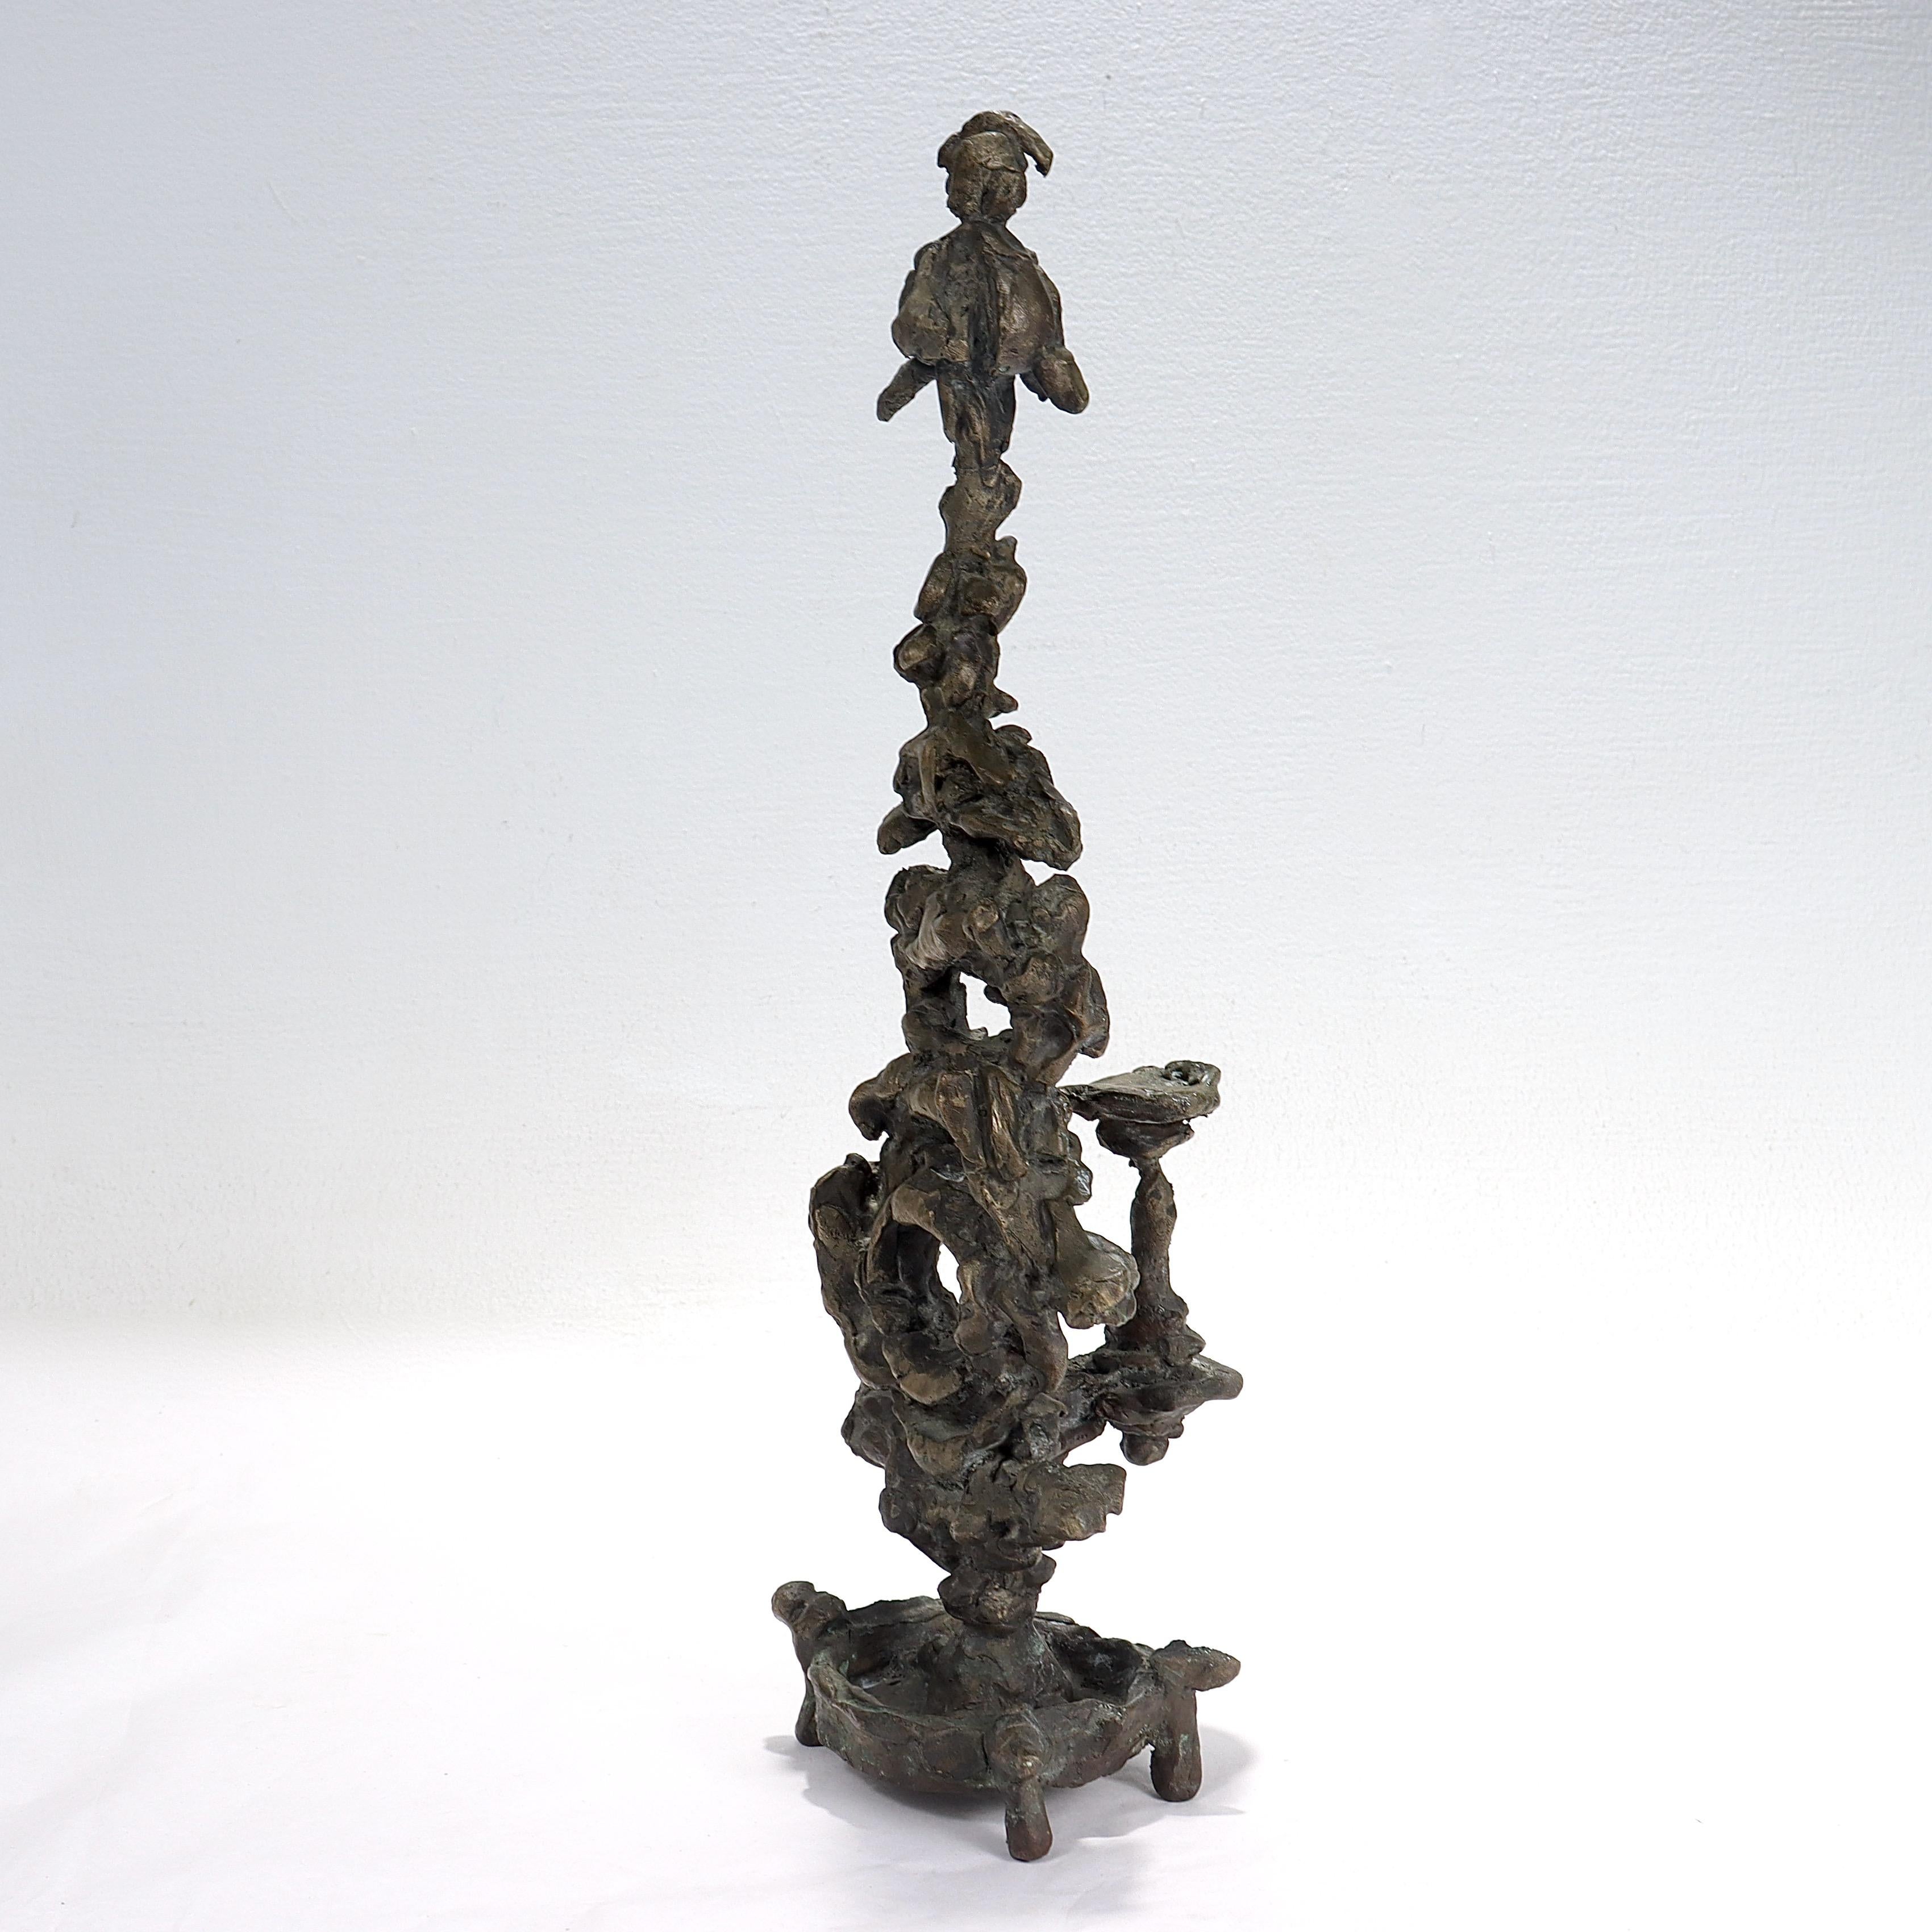 A fine midcentury bronze sculpture.

In the form of a stylized totem.

With a round plinth supported by 4 legs.

Simply a wonderful sculpture. 

Date:
Mid tolate 20th century.

Marks: 
Apparently unmarked.

Overall condition:
It is in